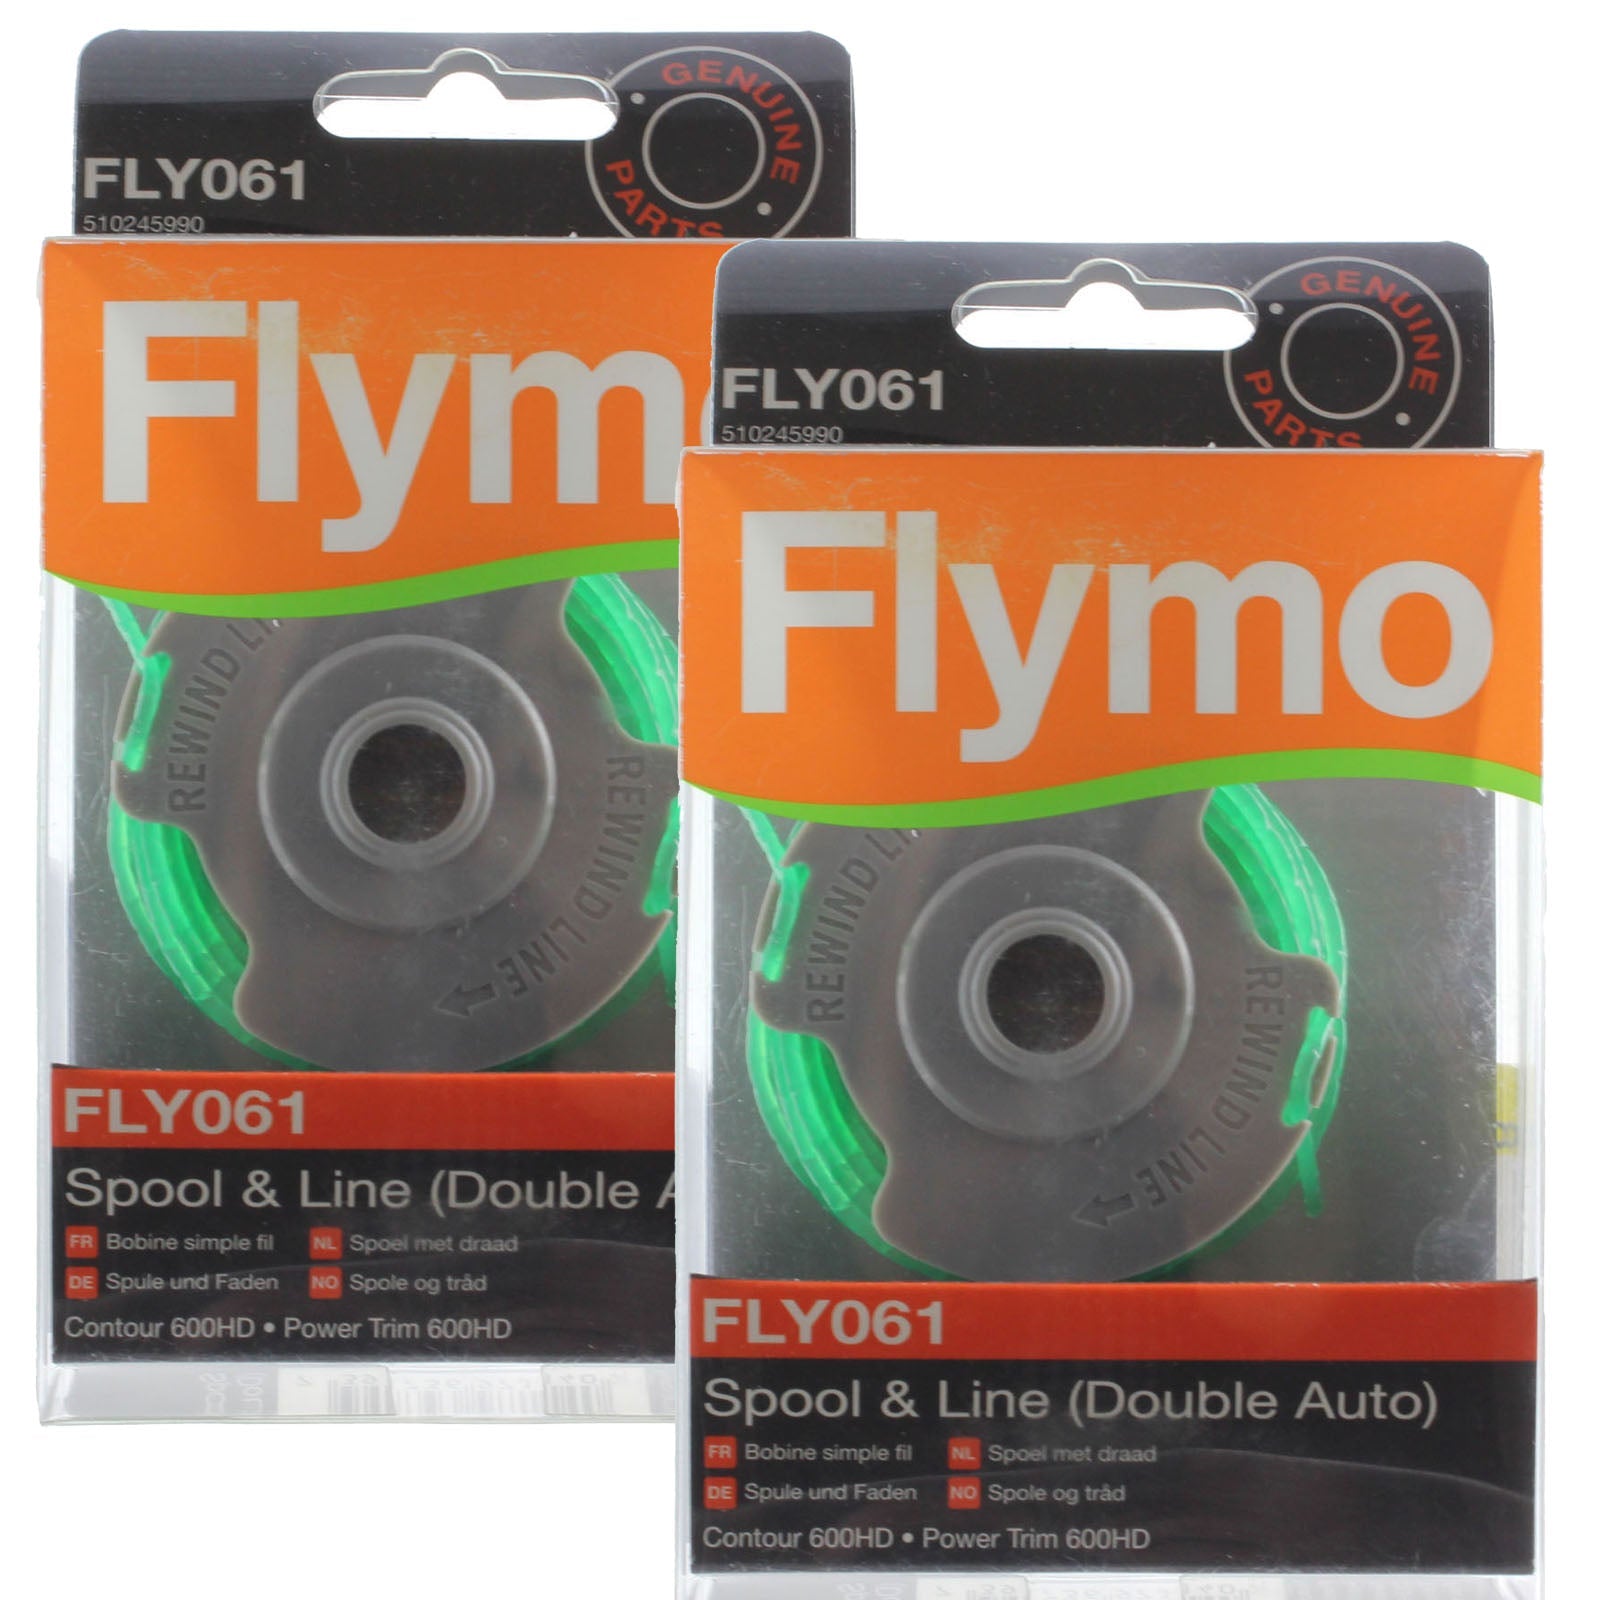 FLYMO Strimmer Spool Line 2mm Double Auto FLY061 Power Trim Contour 600HD x 2